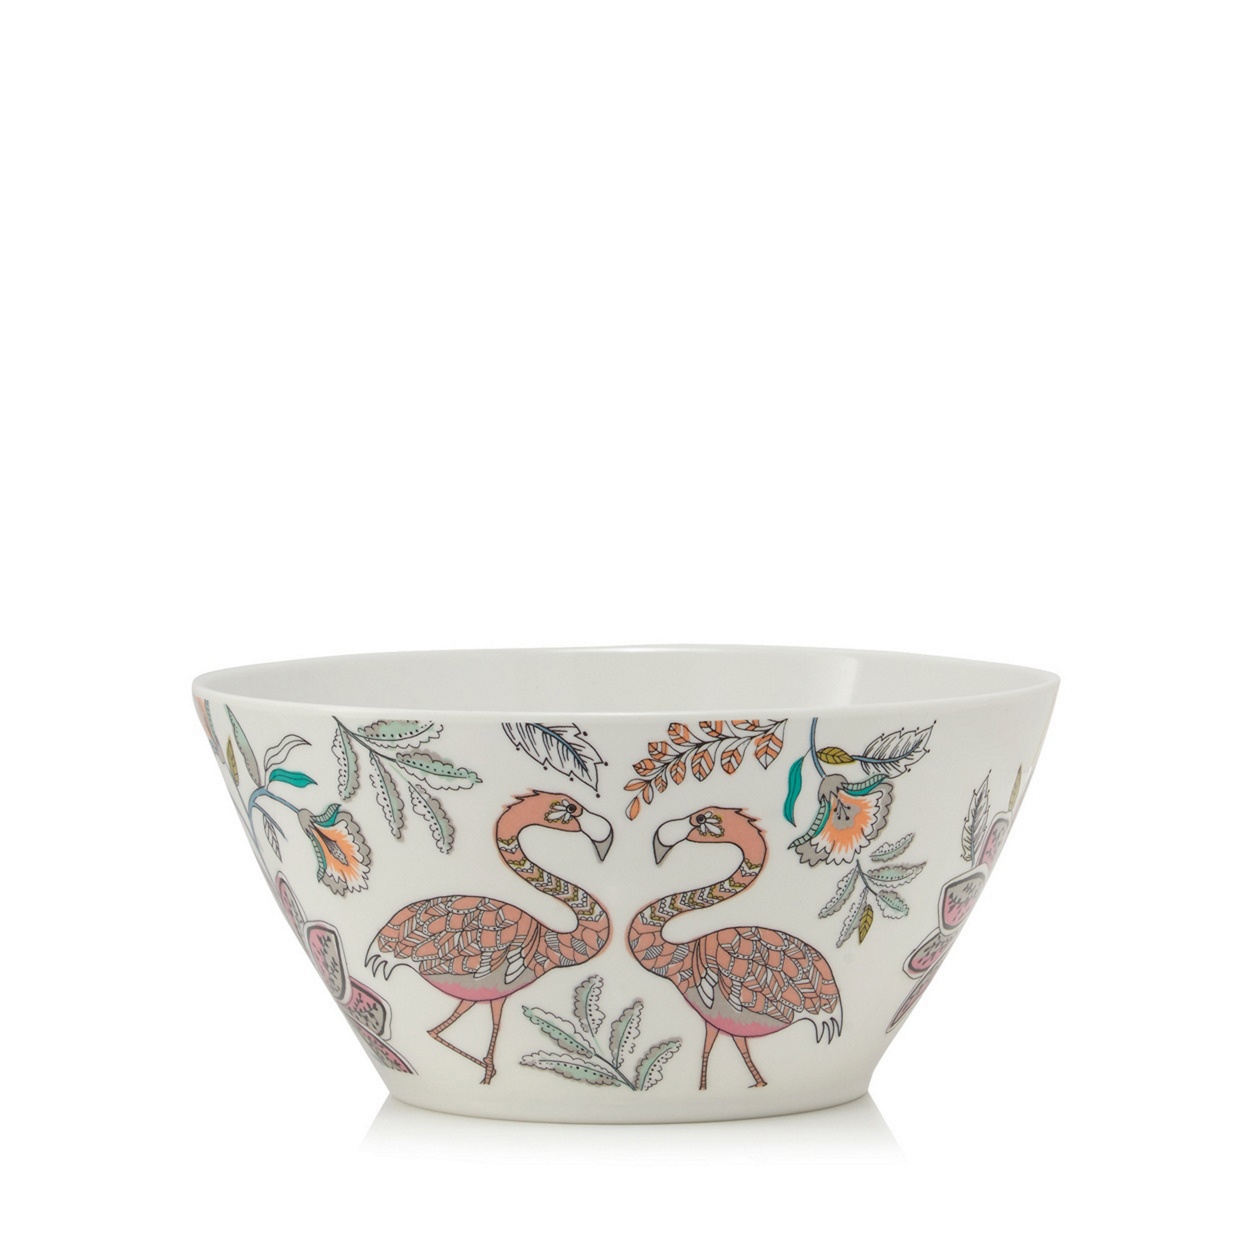 Perfect for picnics and garden parties, these floral and bird print melamine bowls, £20 for set of 4 from Debenhams, are on our wishlist this season.